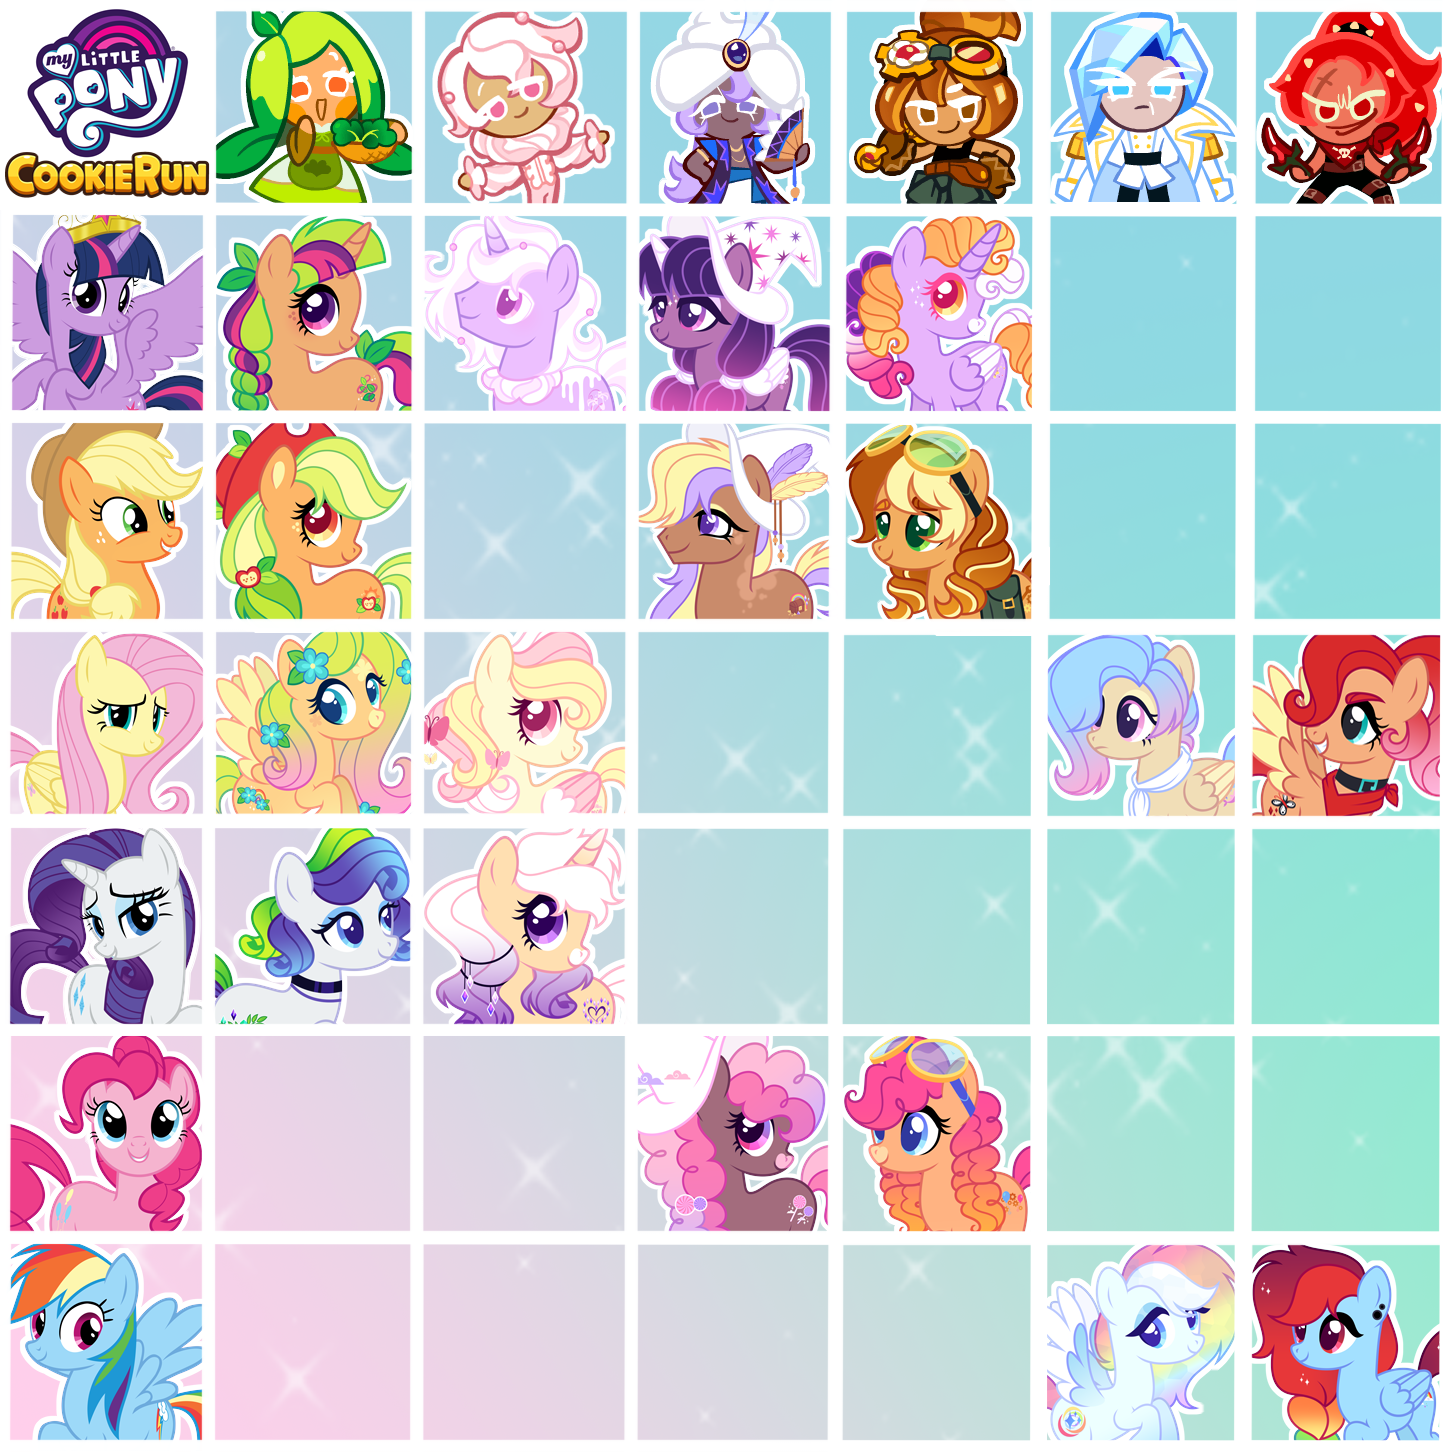 MLP + Cookie Run Fusion Chart [Never finished] by donquani on DeviantArt